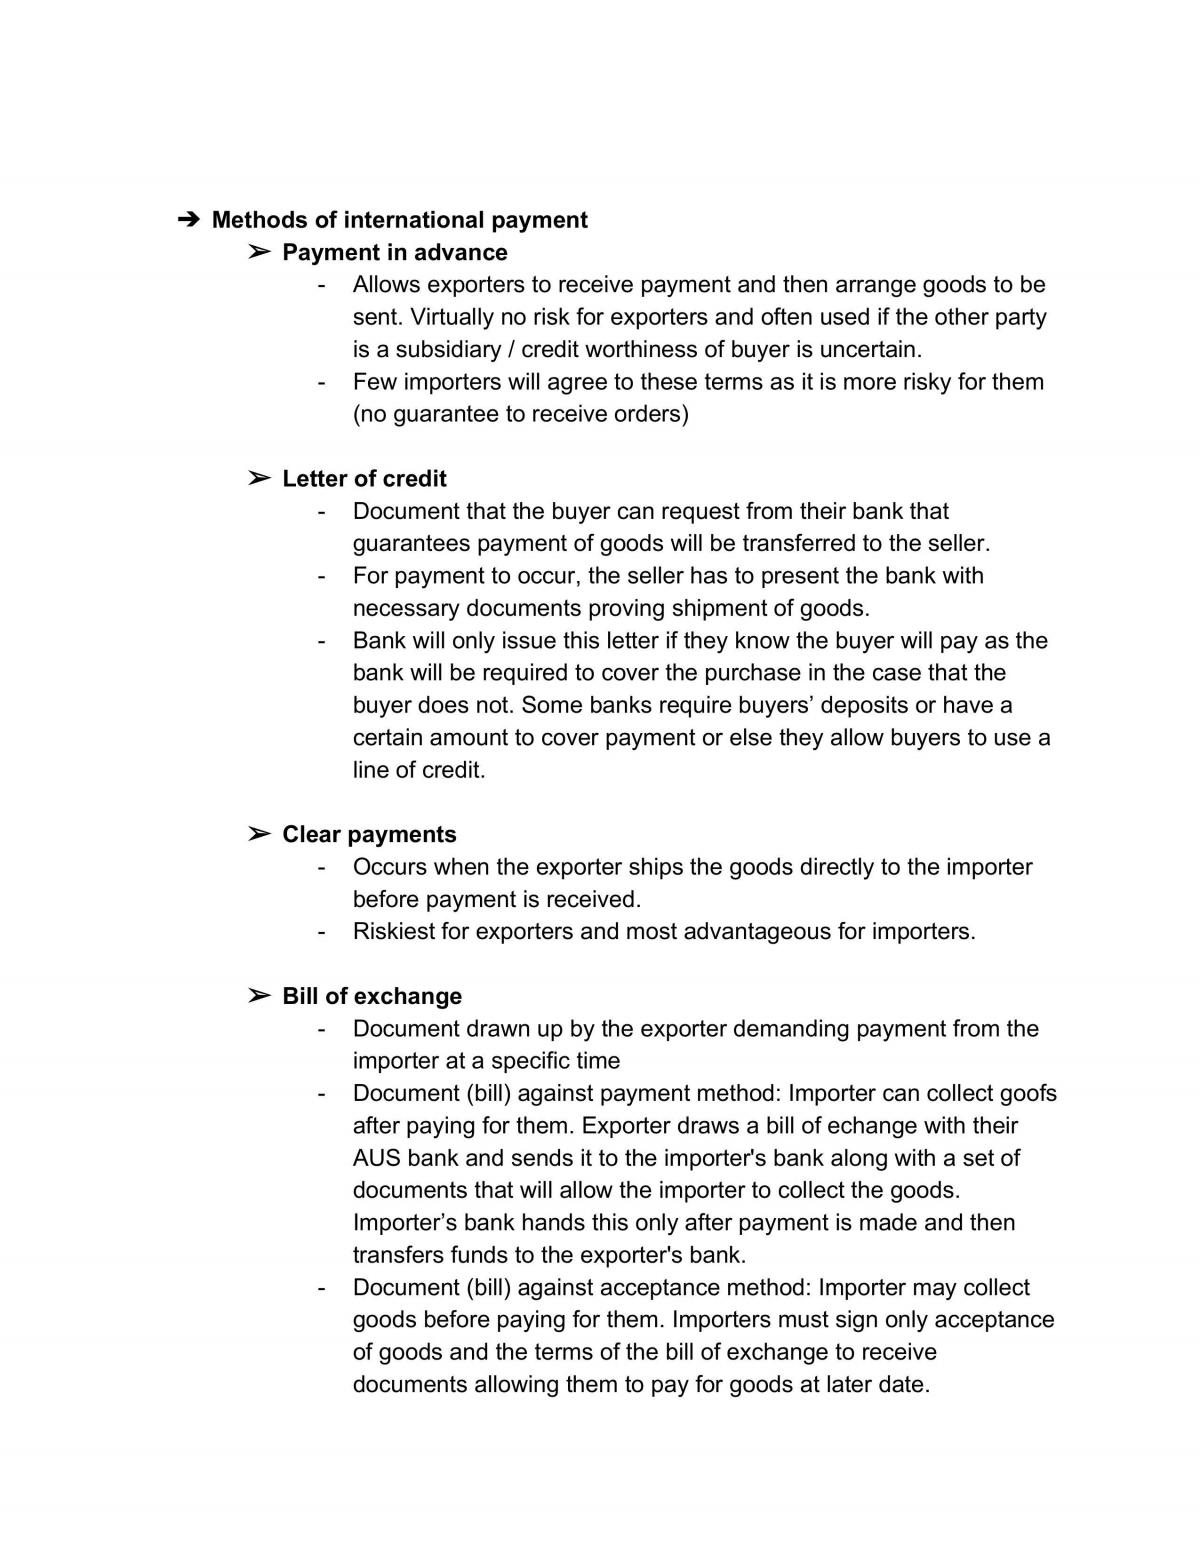 Business Studies - Finance - Page 22